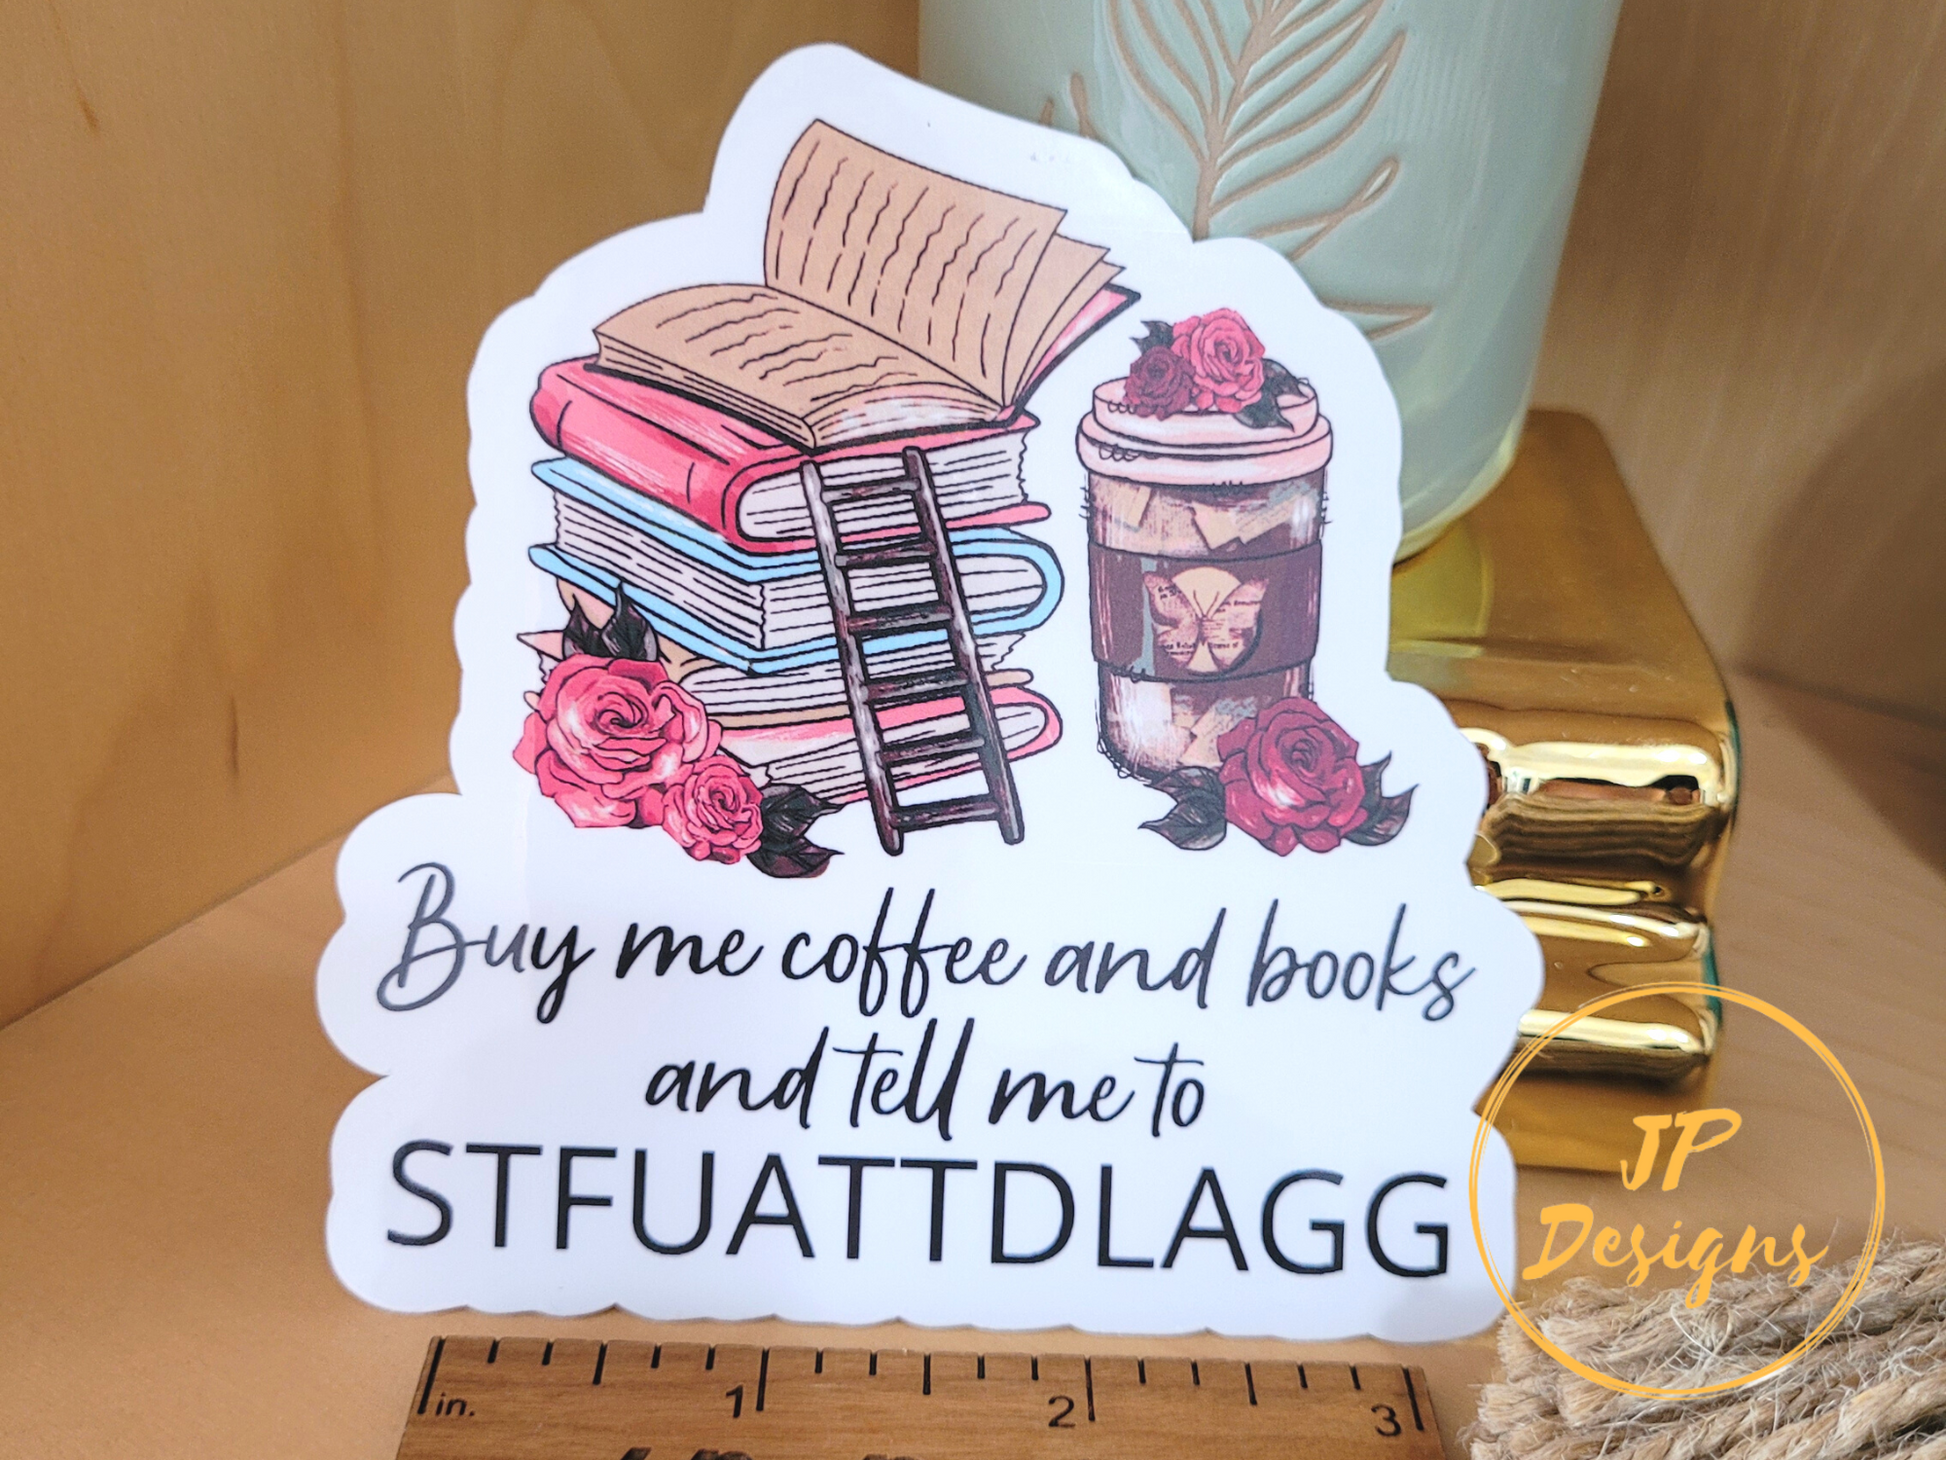 STFUATTDLAGG Sticker, Buy Me Coffee and Books and Shut Up and Take This D Like A Good Girl Sticker, Smut Sticker, Romance Book Lover Gift